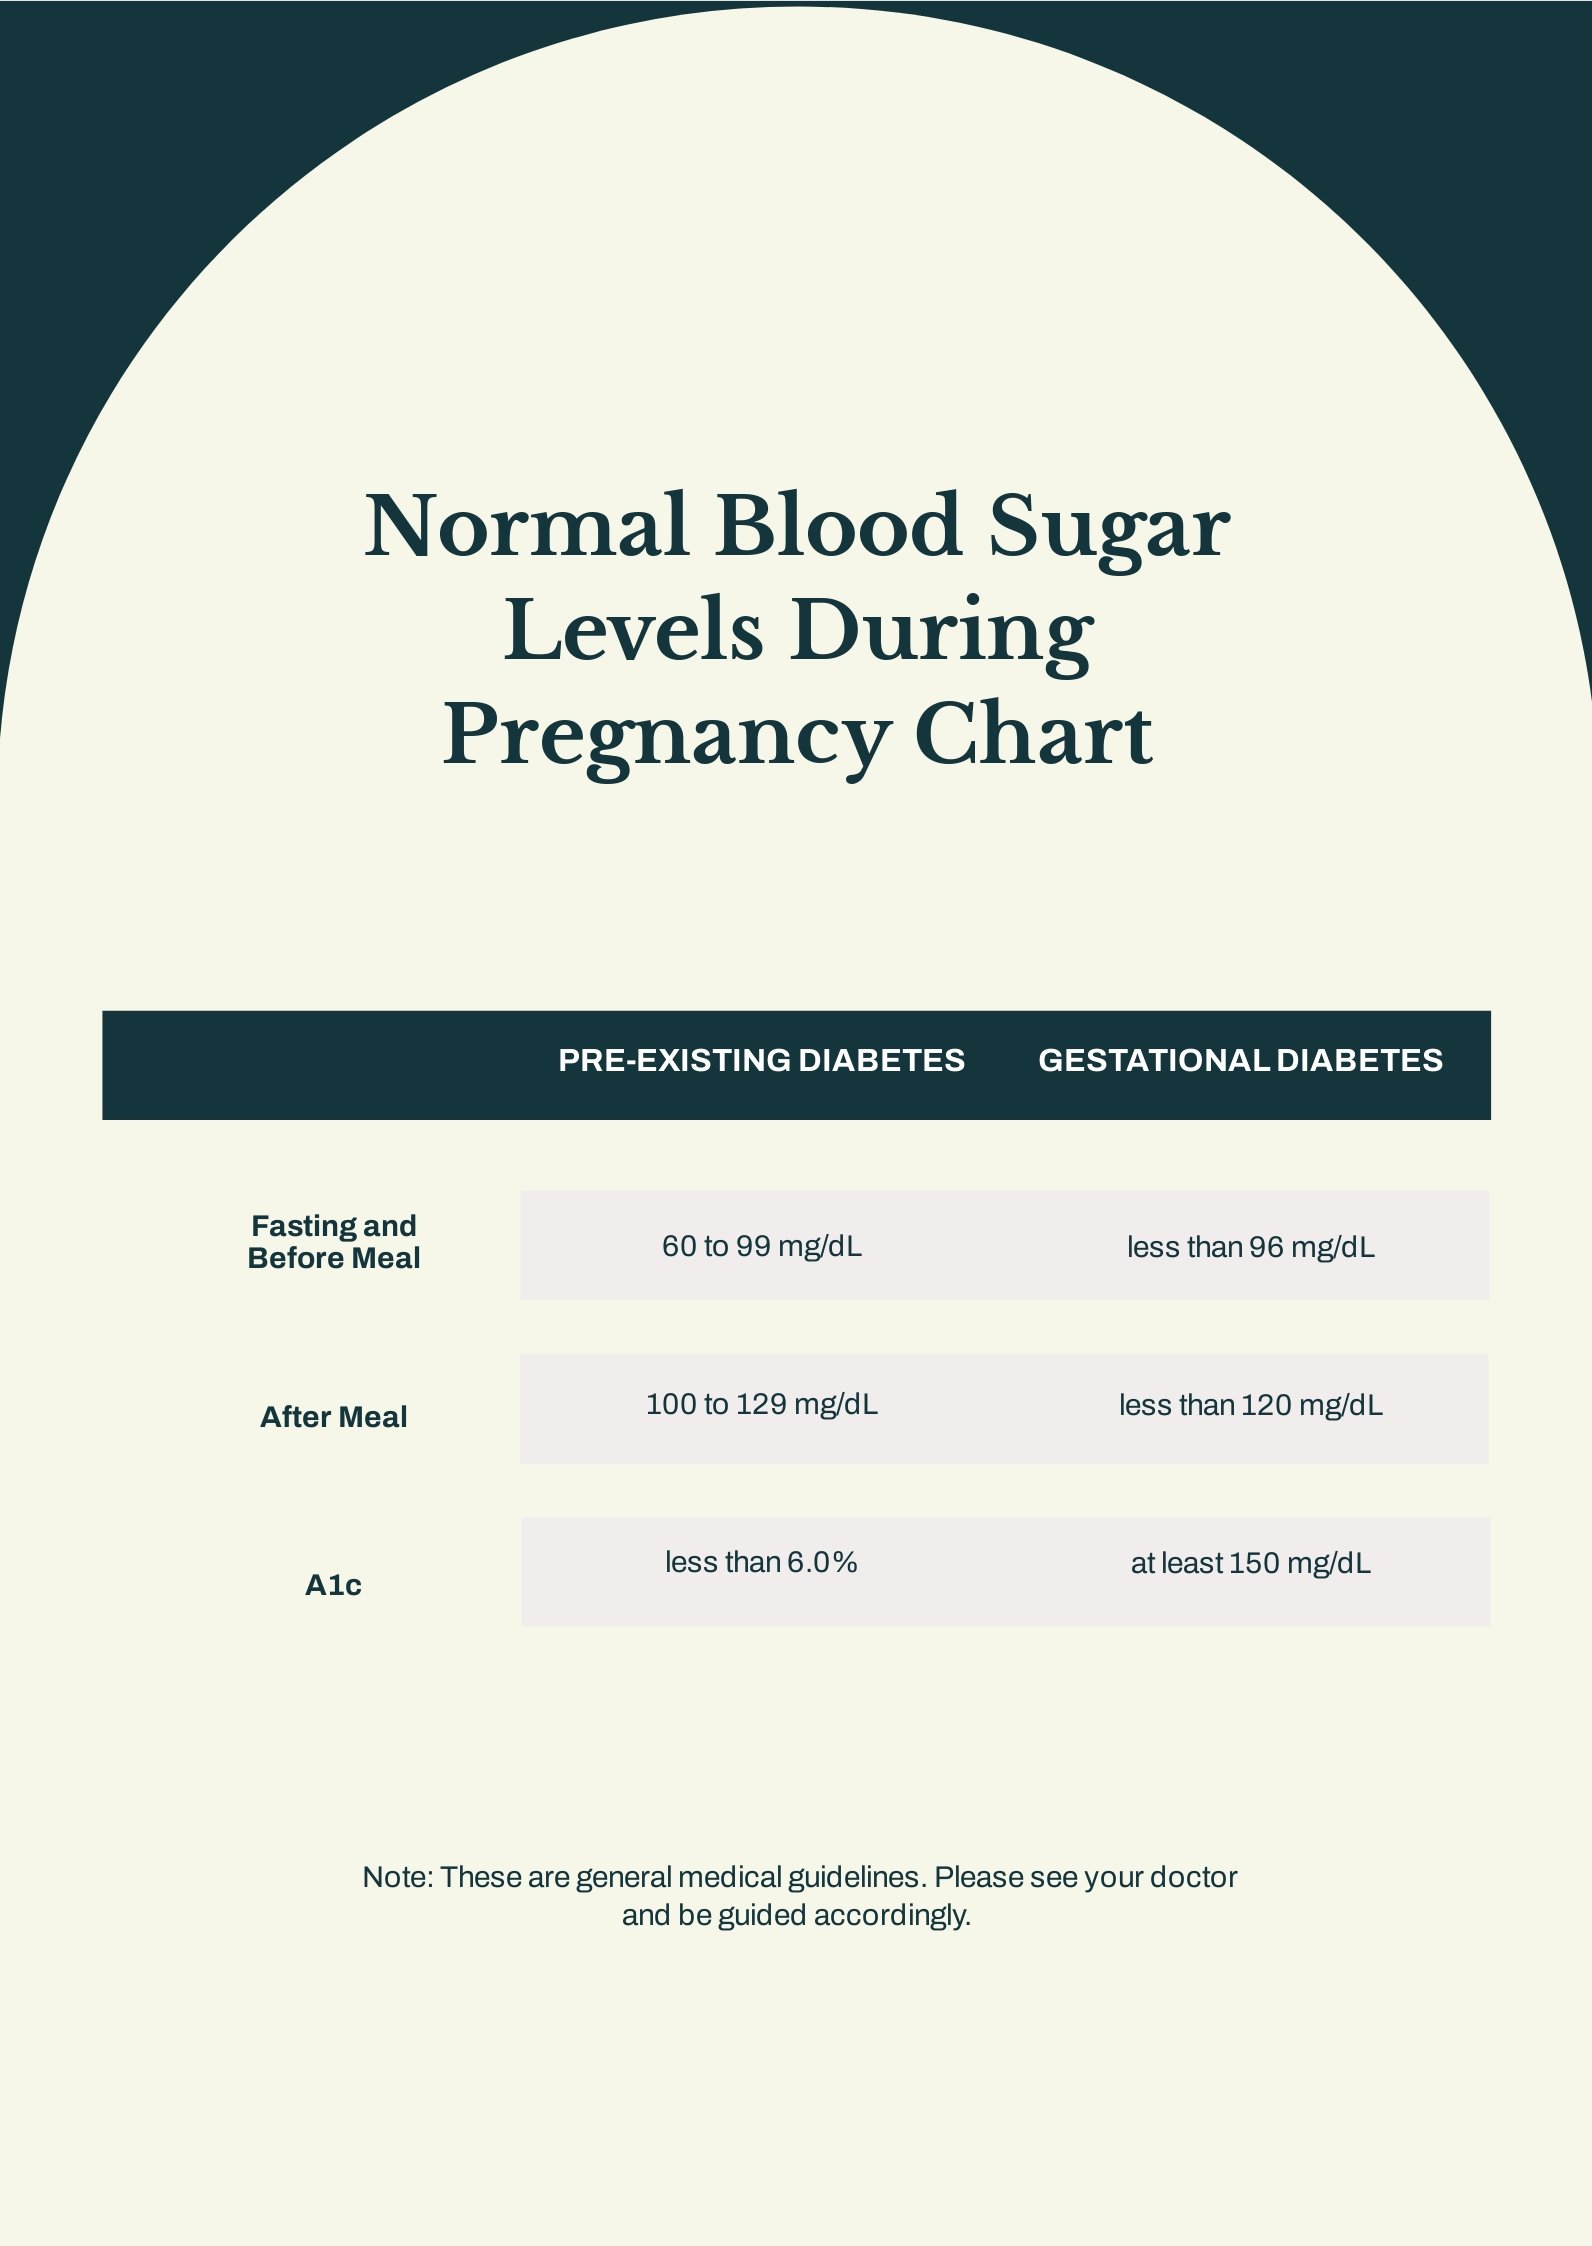 Normal Blood Sugar Levels During Pregnancy Chart